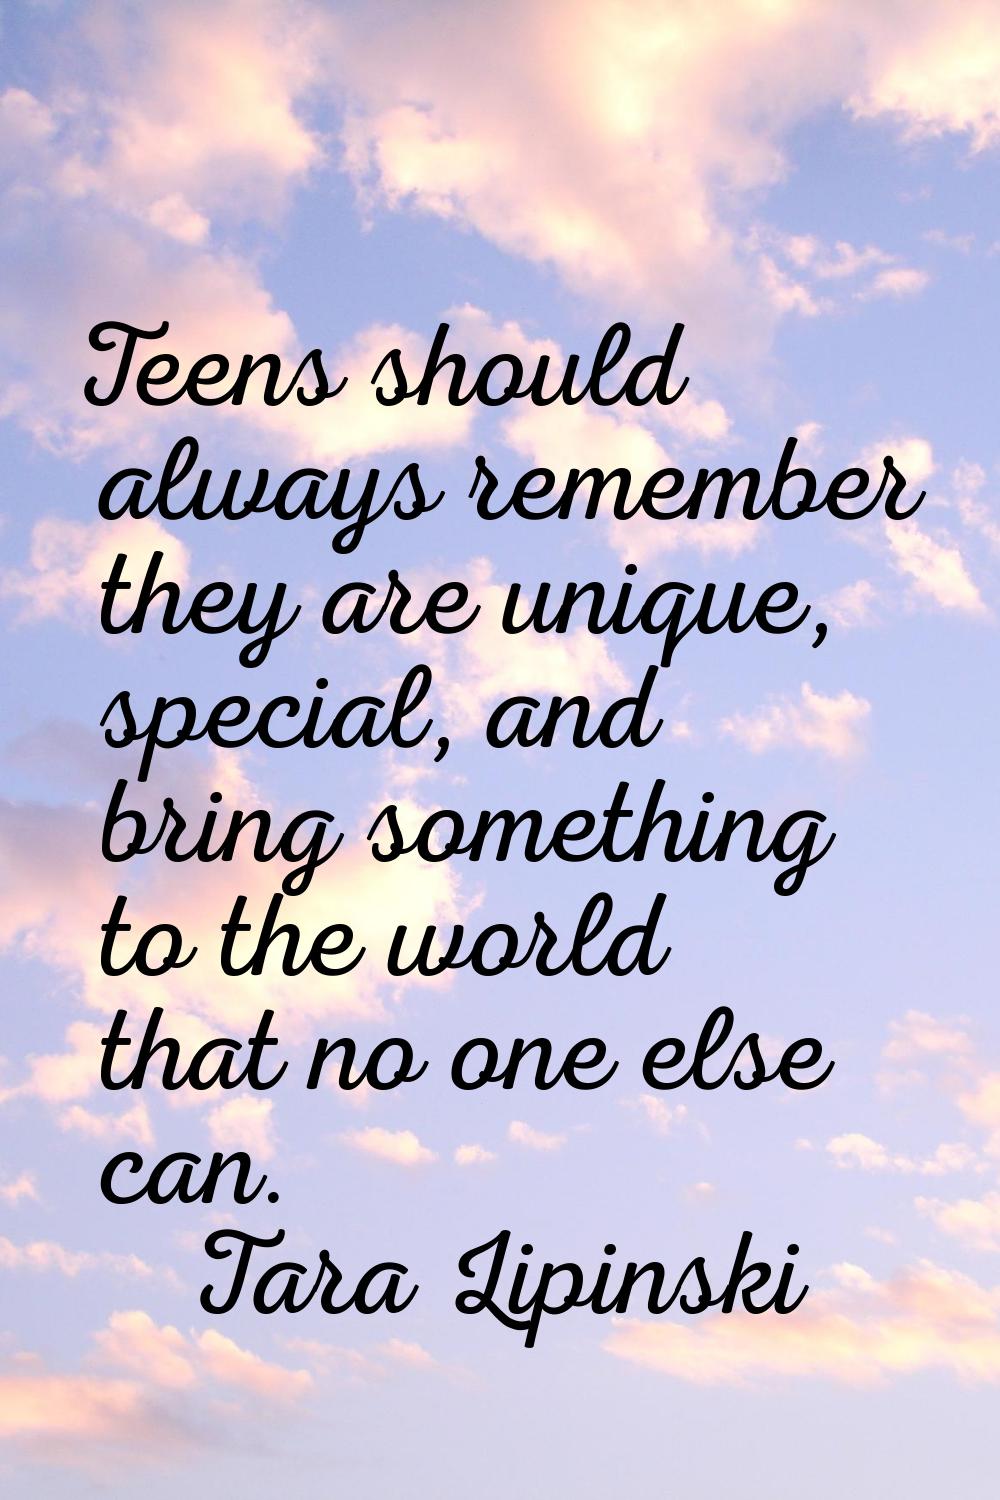 Teens should always remember they are unique, special, and bring something to the world that no one